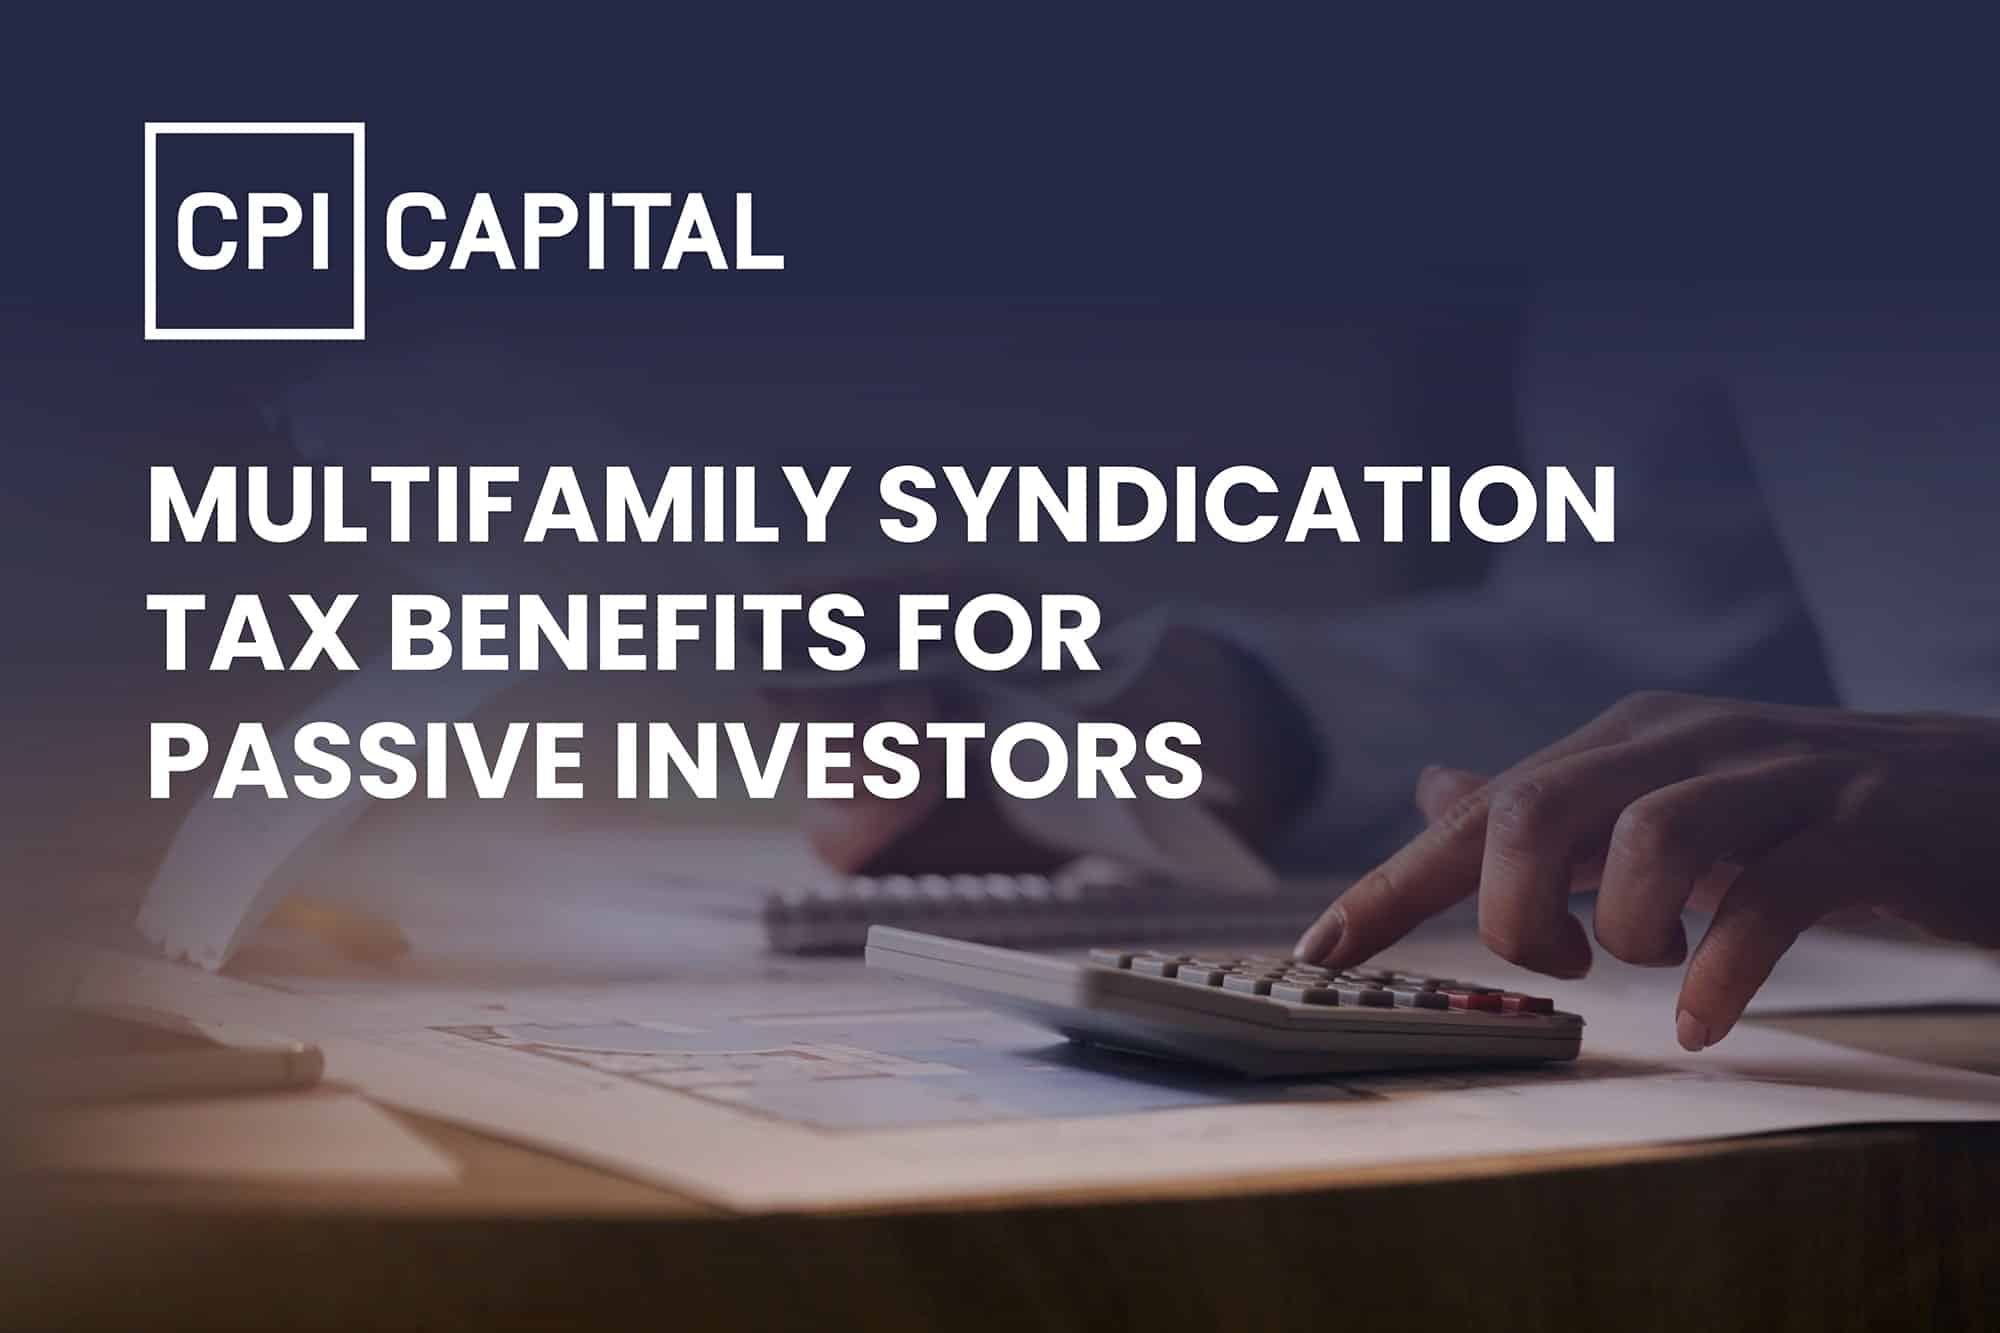 Multifamily Syndication Tax Benefits for Passive Investors